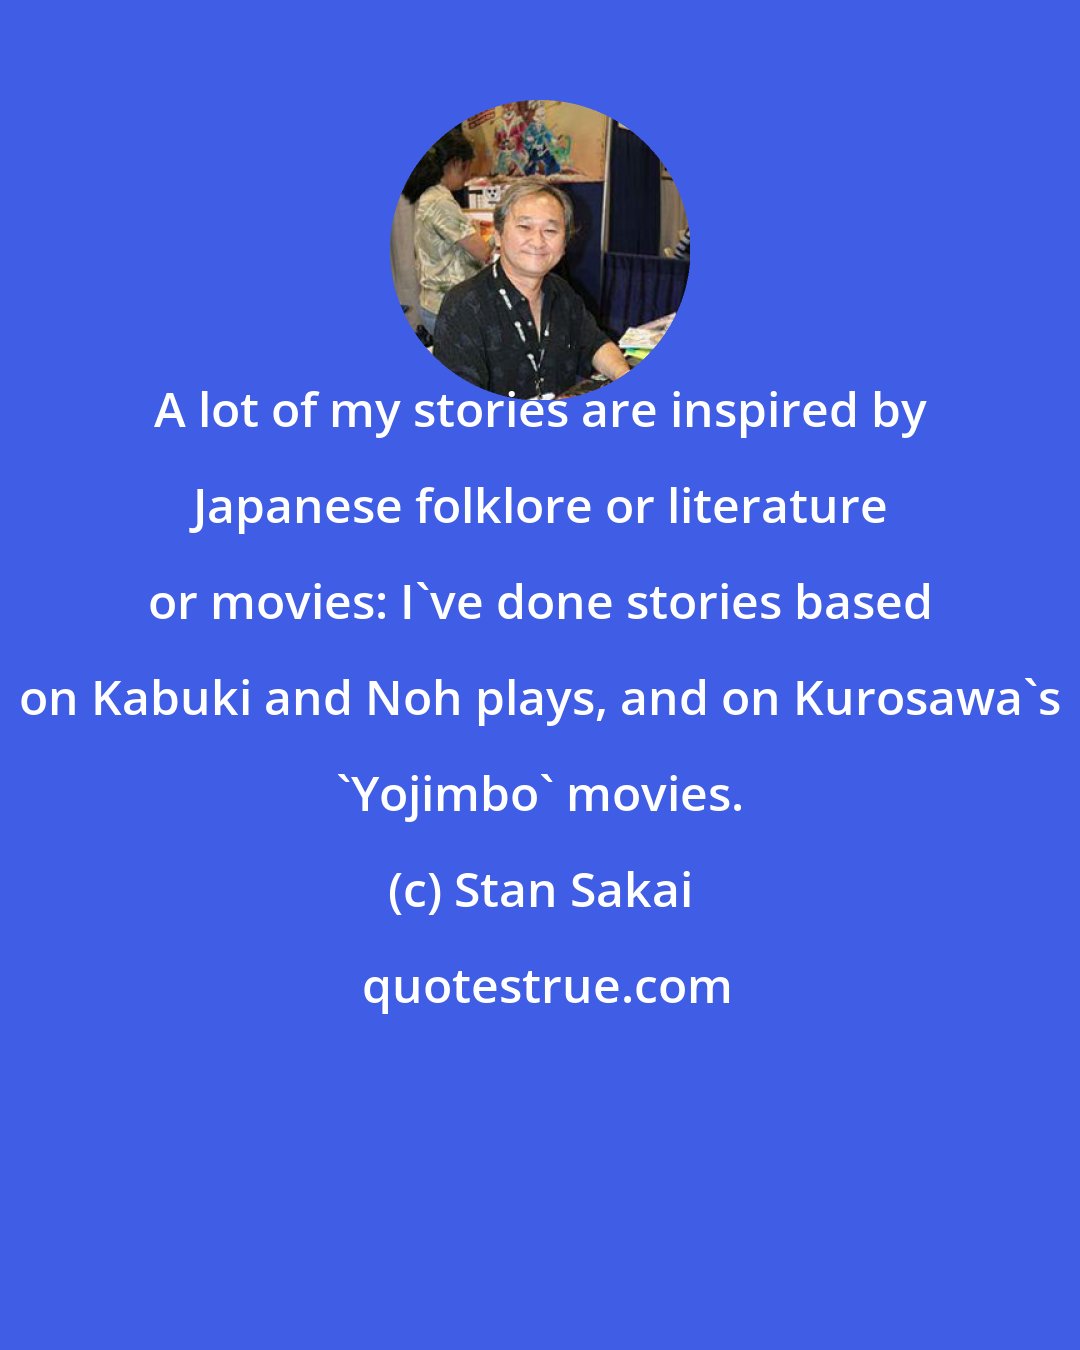 Stan Sakai: A lot of my stories are inspired by Japanese folklore or literature or movies: I've done stories based on Kabuki and Noh plays, and on Kurosawa's 'Yojimbo' movies.